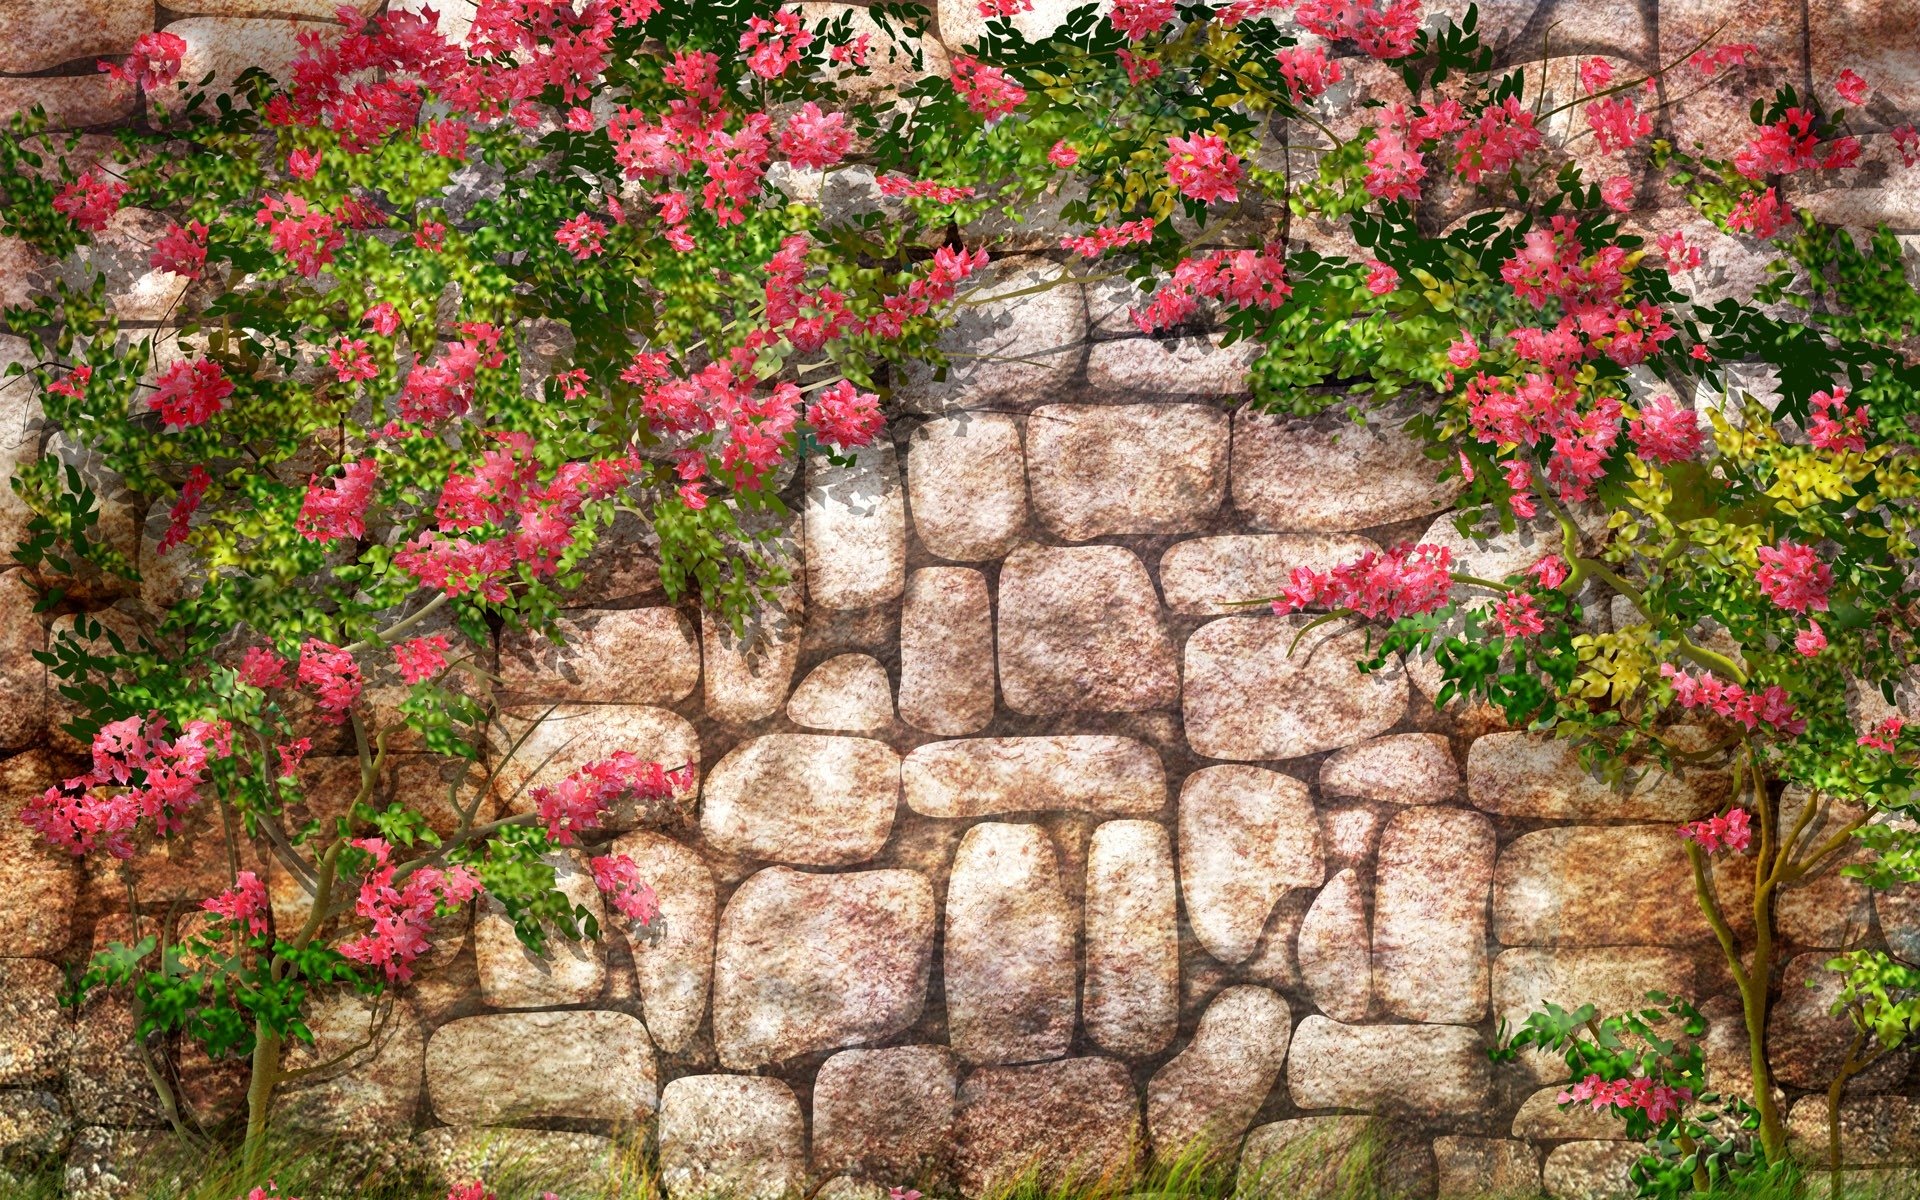 Stone Wall and Flowers.